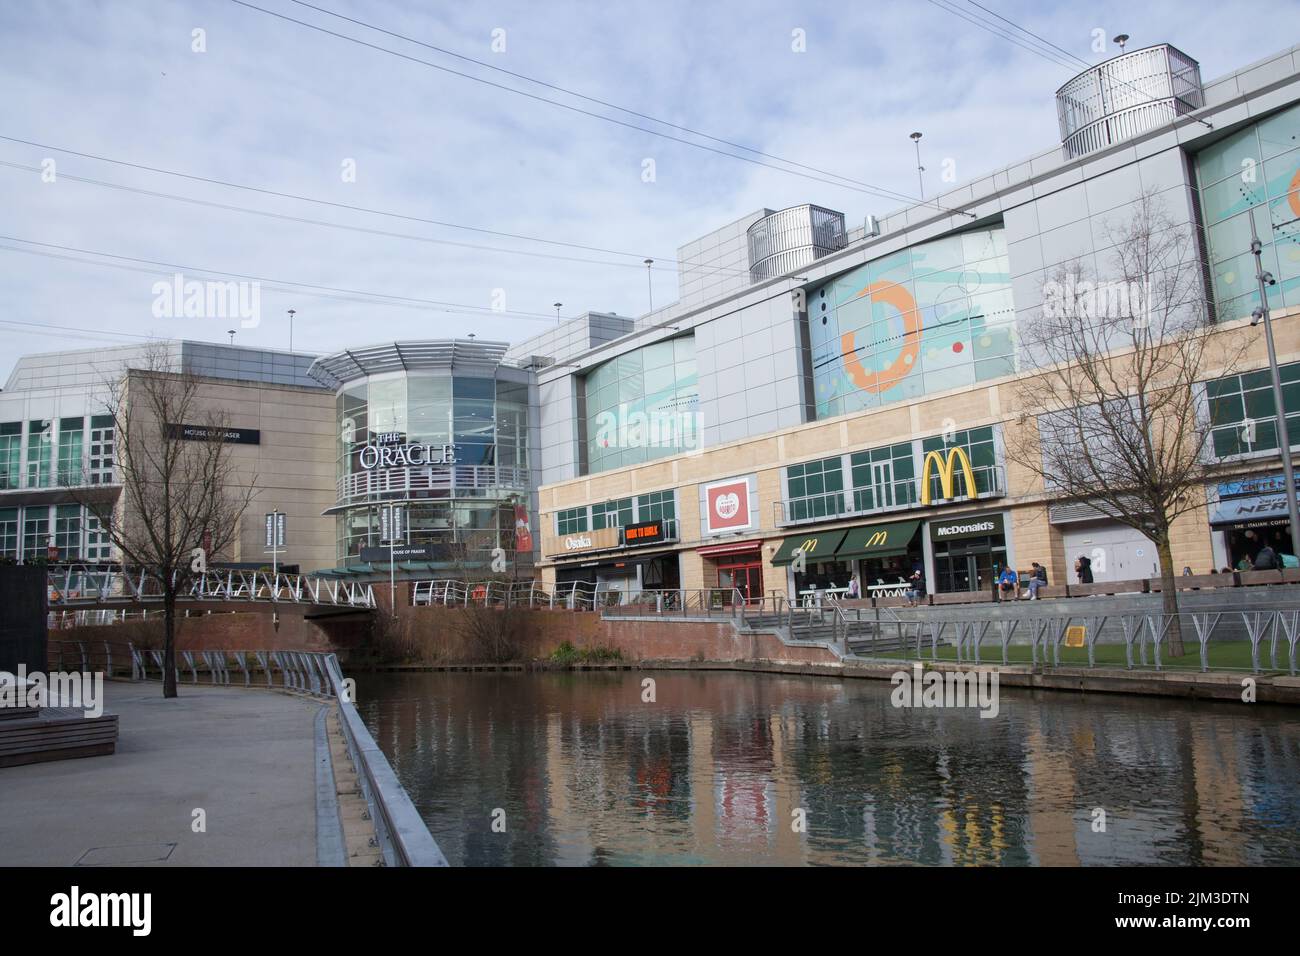 Views of The Oracle Shopping Centre in Reading, Berkshire in the UK Stock Photo